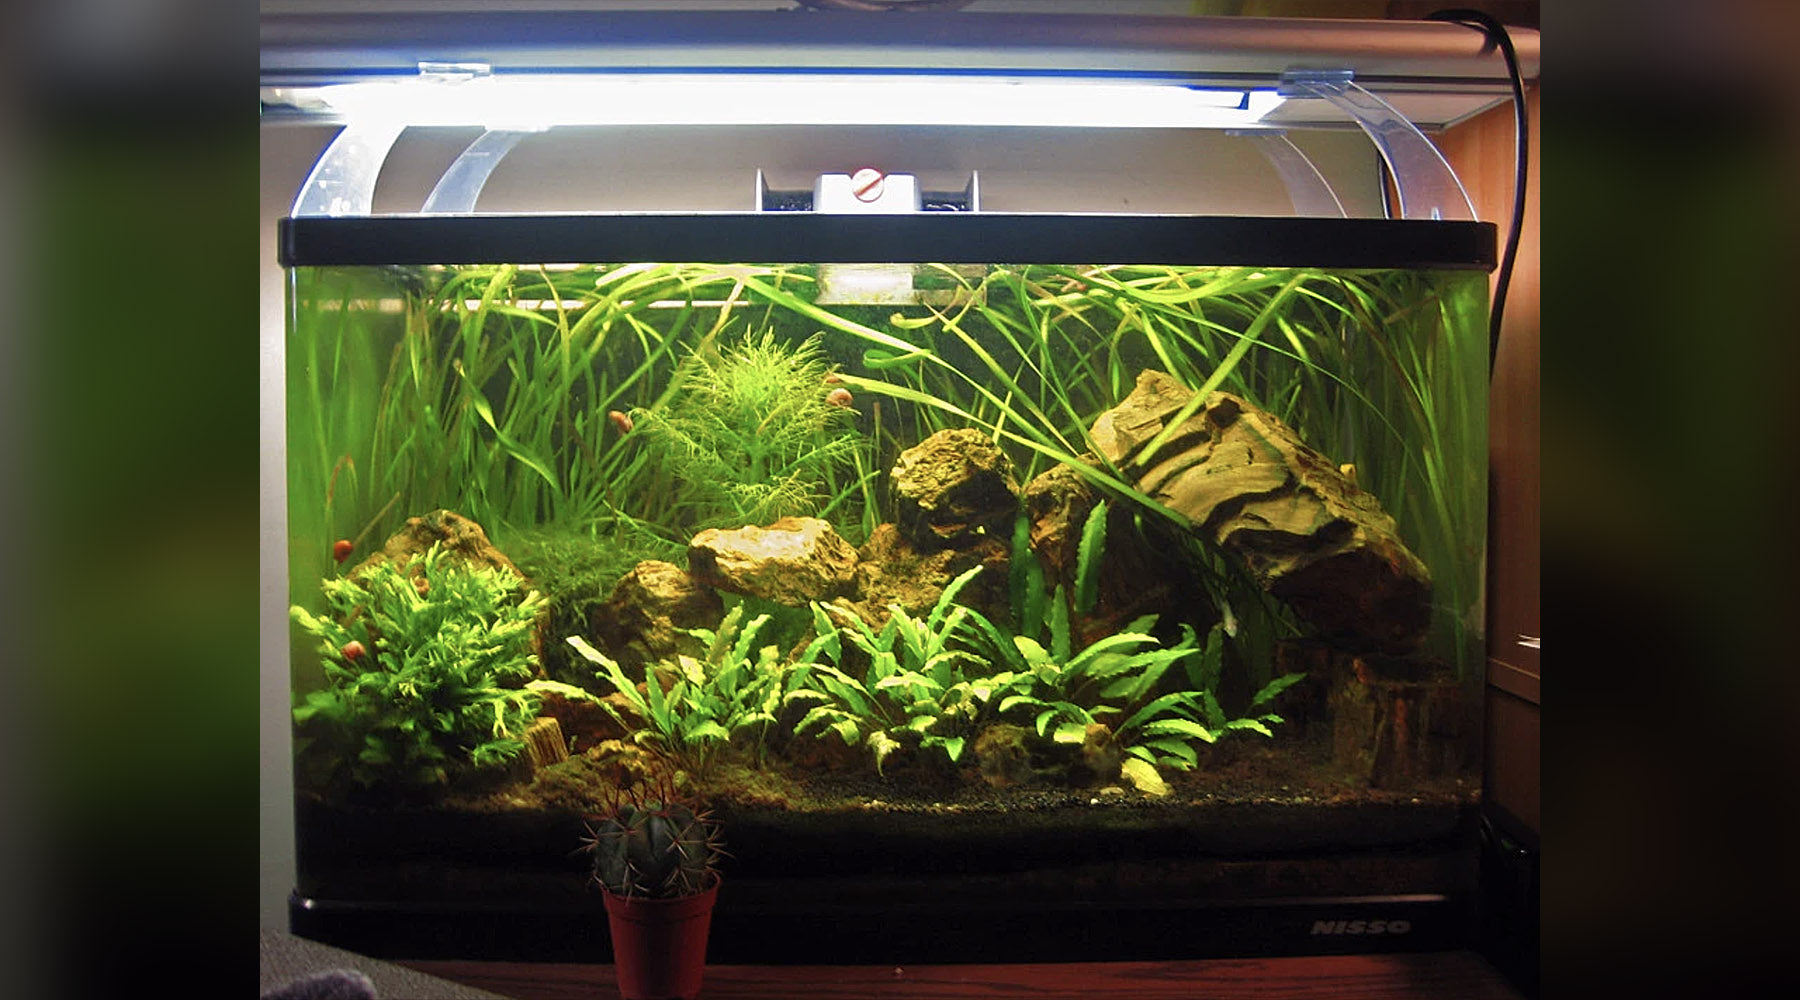 'No ferts, no dosing, no CO2' planted tanks, how valid are they?